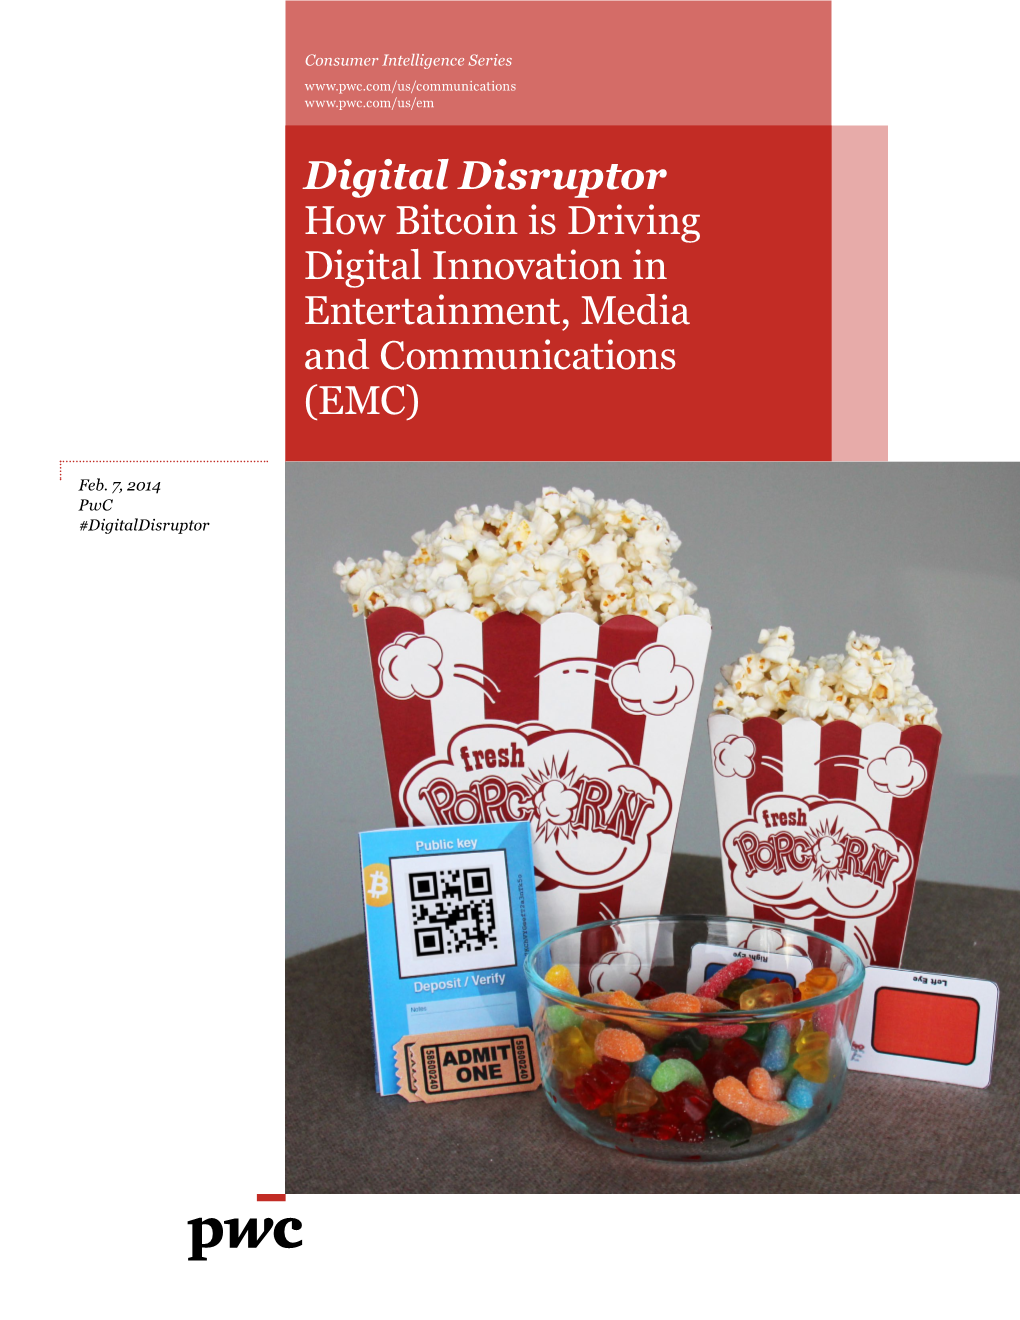 Digital Disruptor How Bitcoin Is Driving Digital Innovation in Entertainment, Media and Communications (EMC)